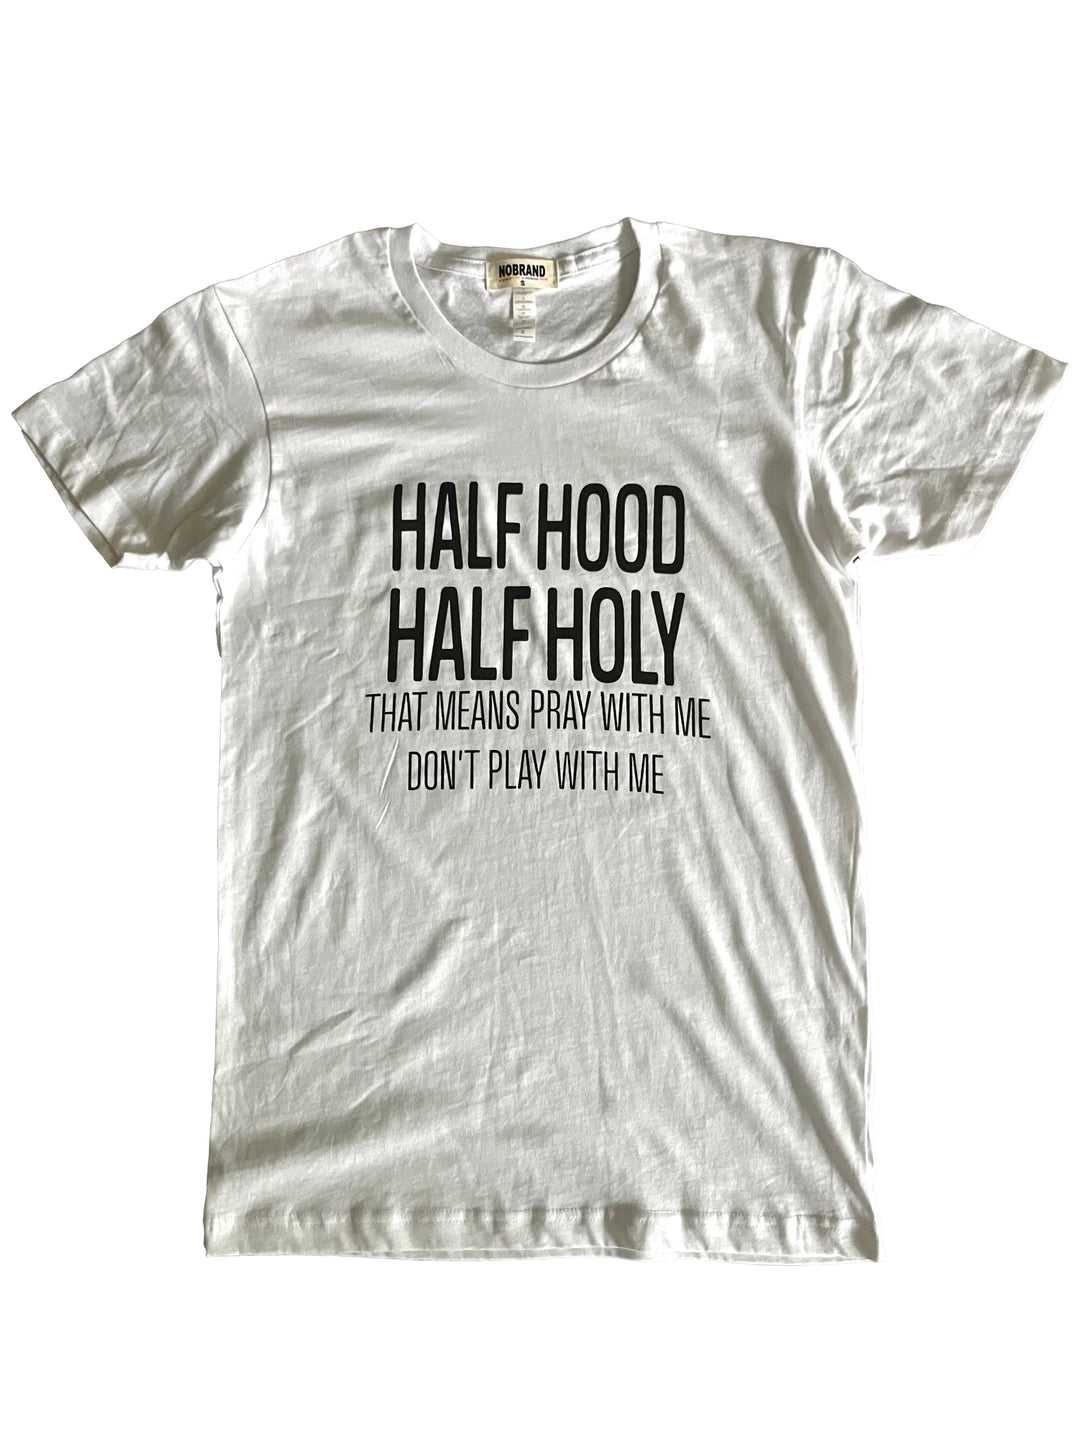 Half Hood/ Half Holly: that means pray with me dont play with me Tee {Unisex}